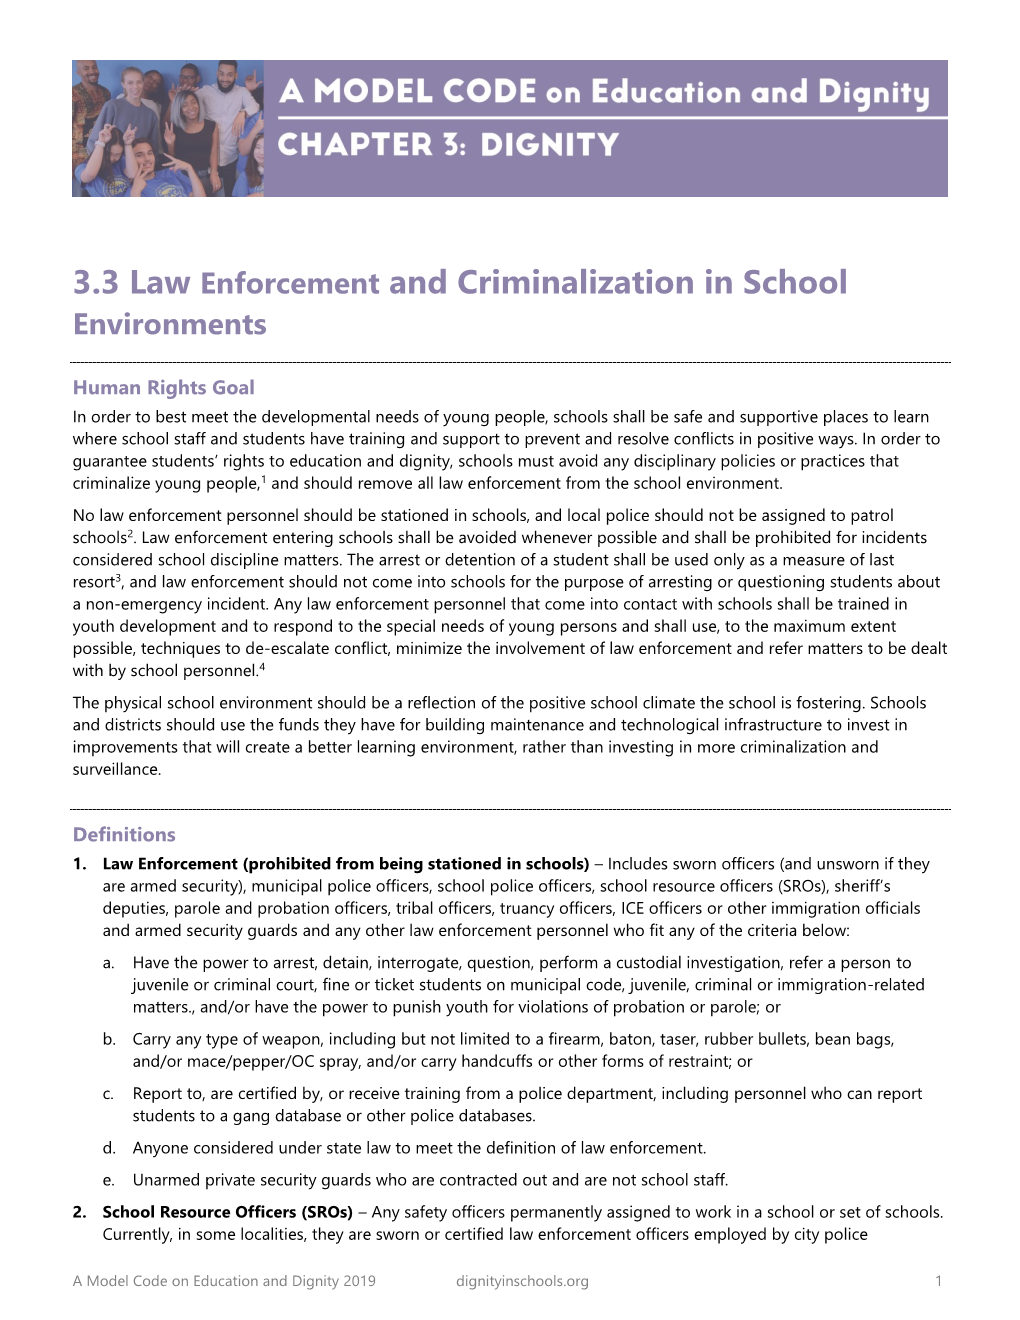 3.3 Law Enforcement and Criminalization in School Environments